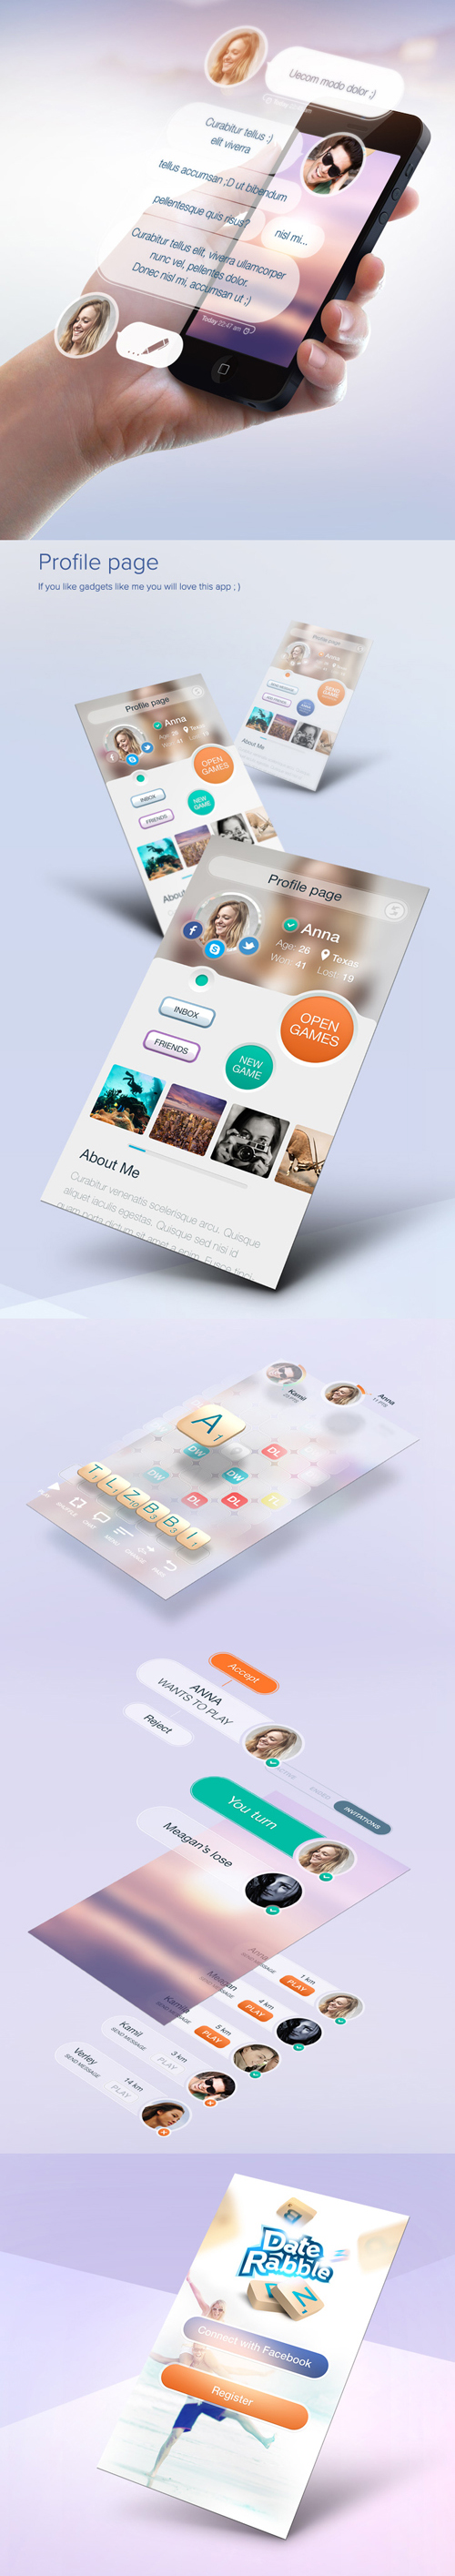 Game app UI Designs and Concepts for Inspiration